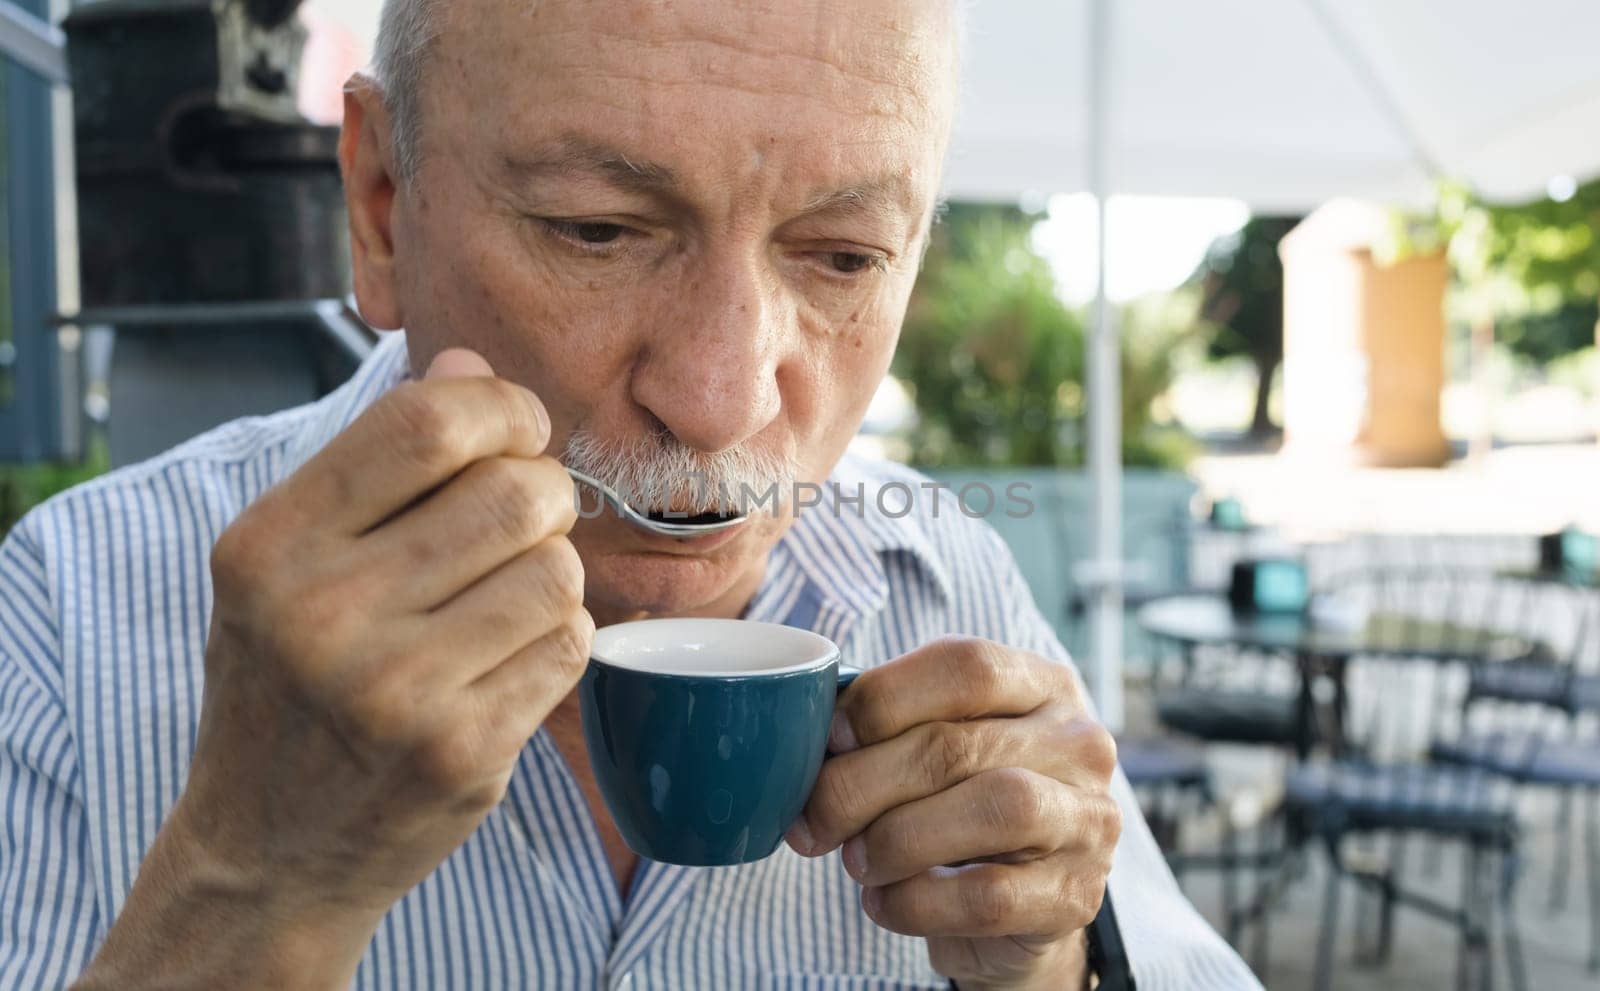 Lifestyle concept. An elderly man drinking espresso coffee at an outdoor cafe in the early hours of the morning before work.
